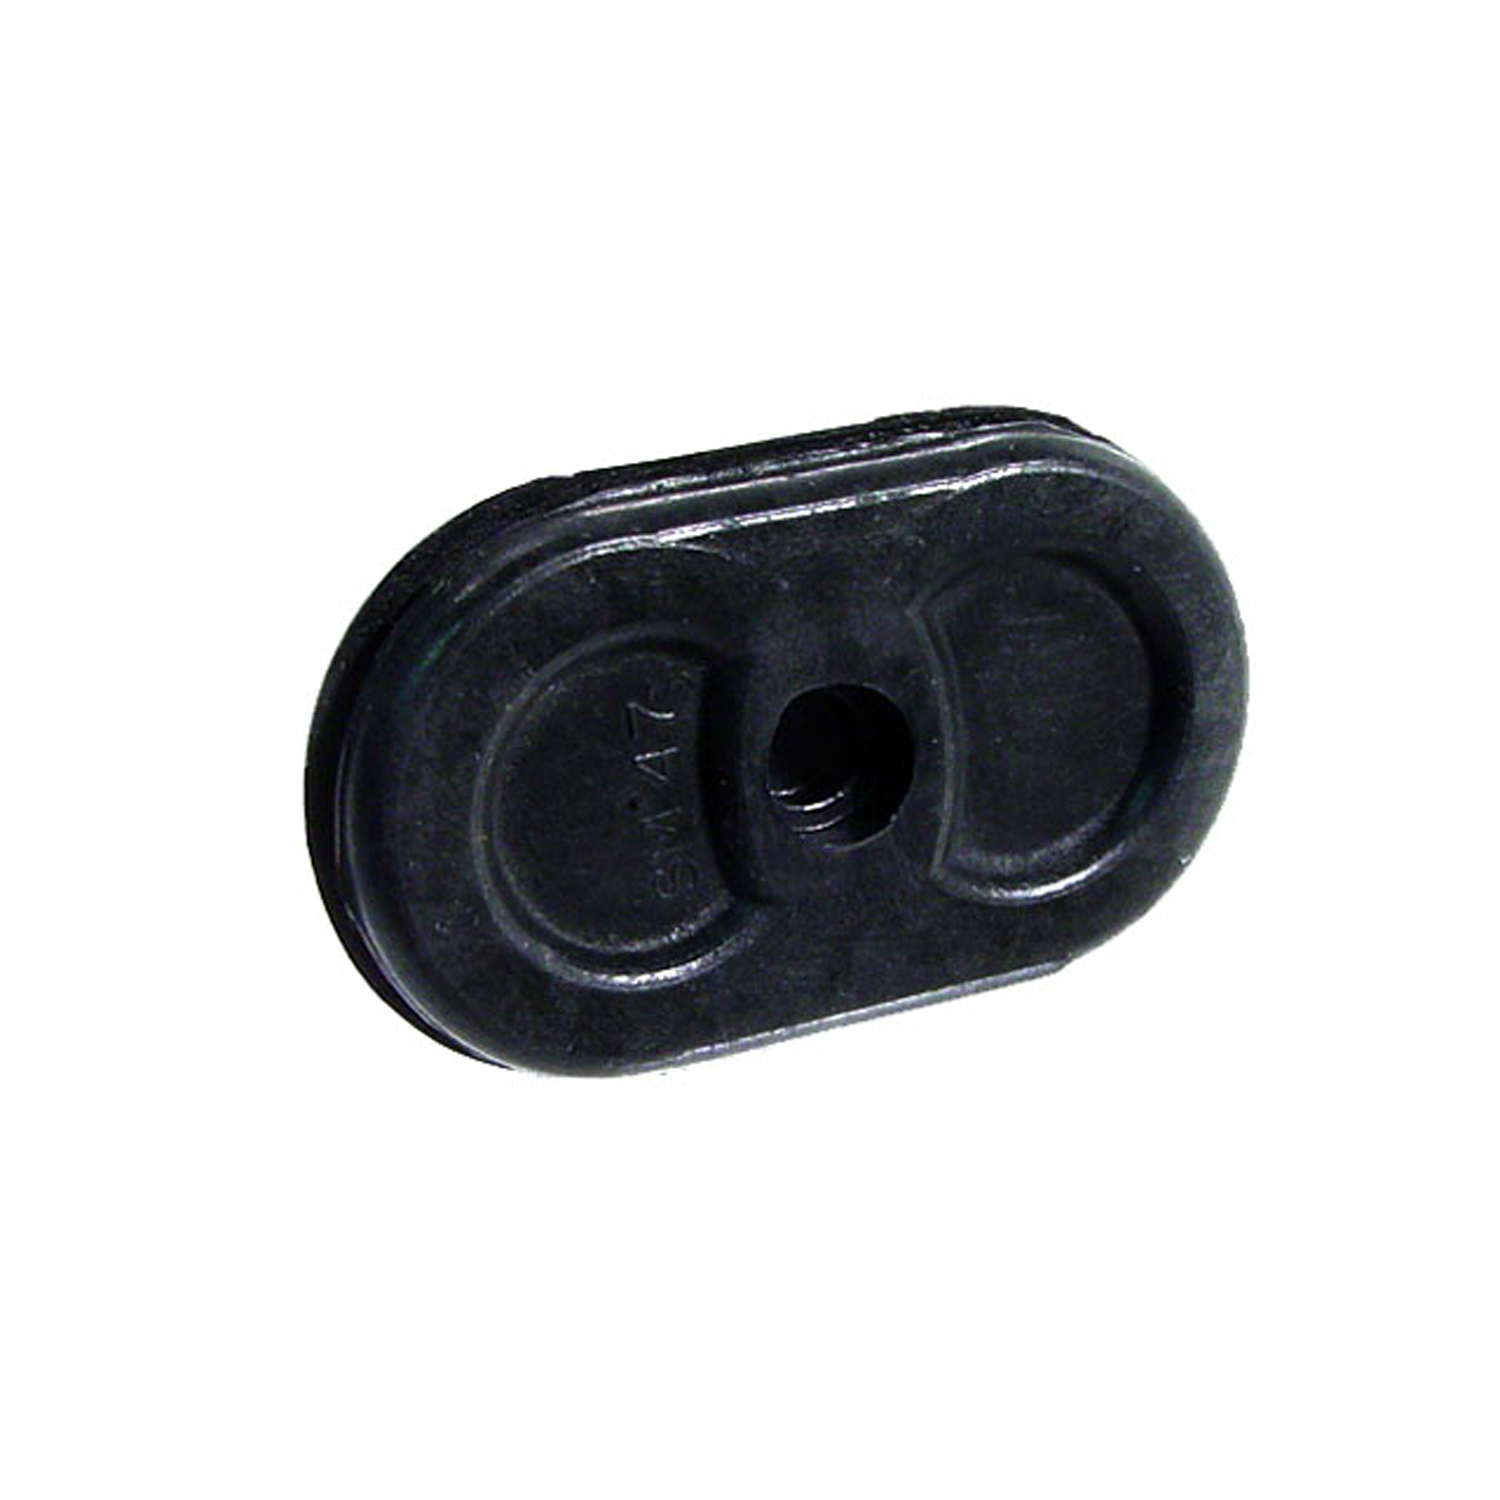 1946 Cadillac Series 75 Fleetwood Speedometer Cable Firewall Grommet.  Fits 1-7/8 long hole-SM 47